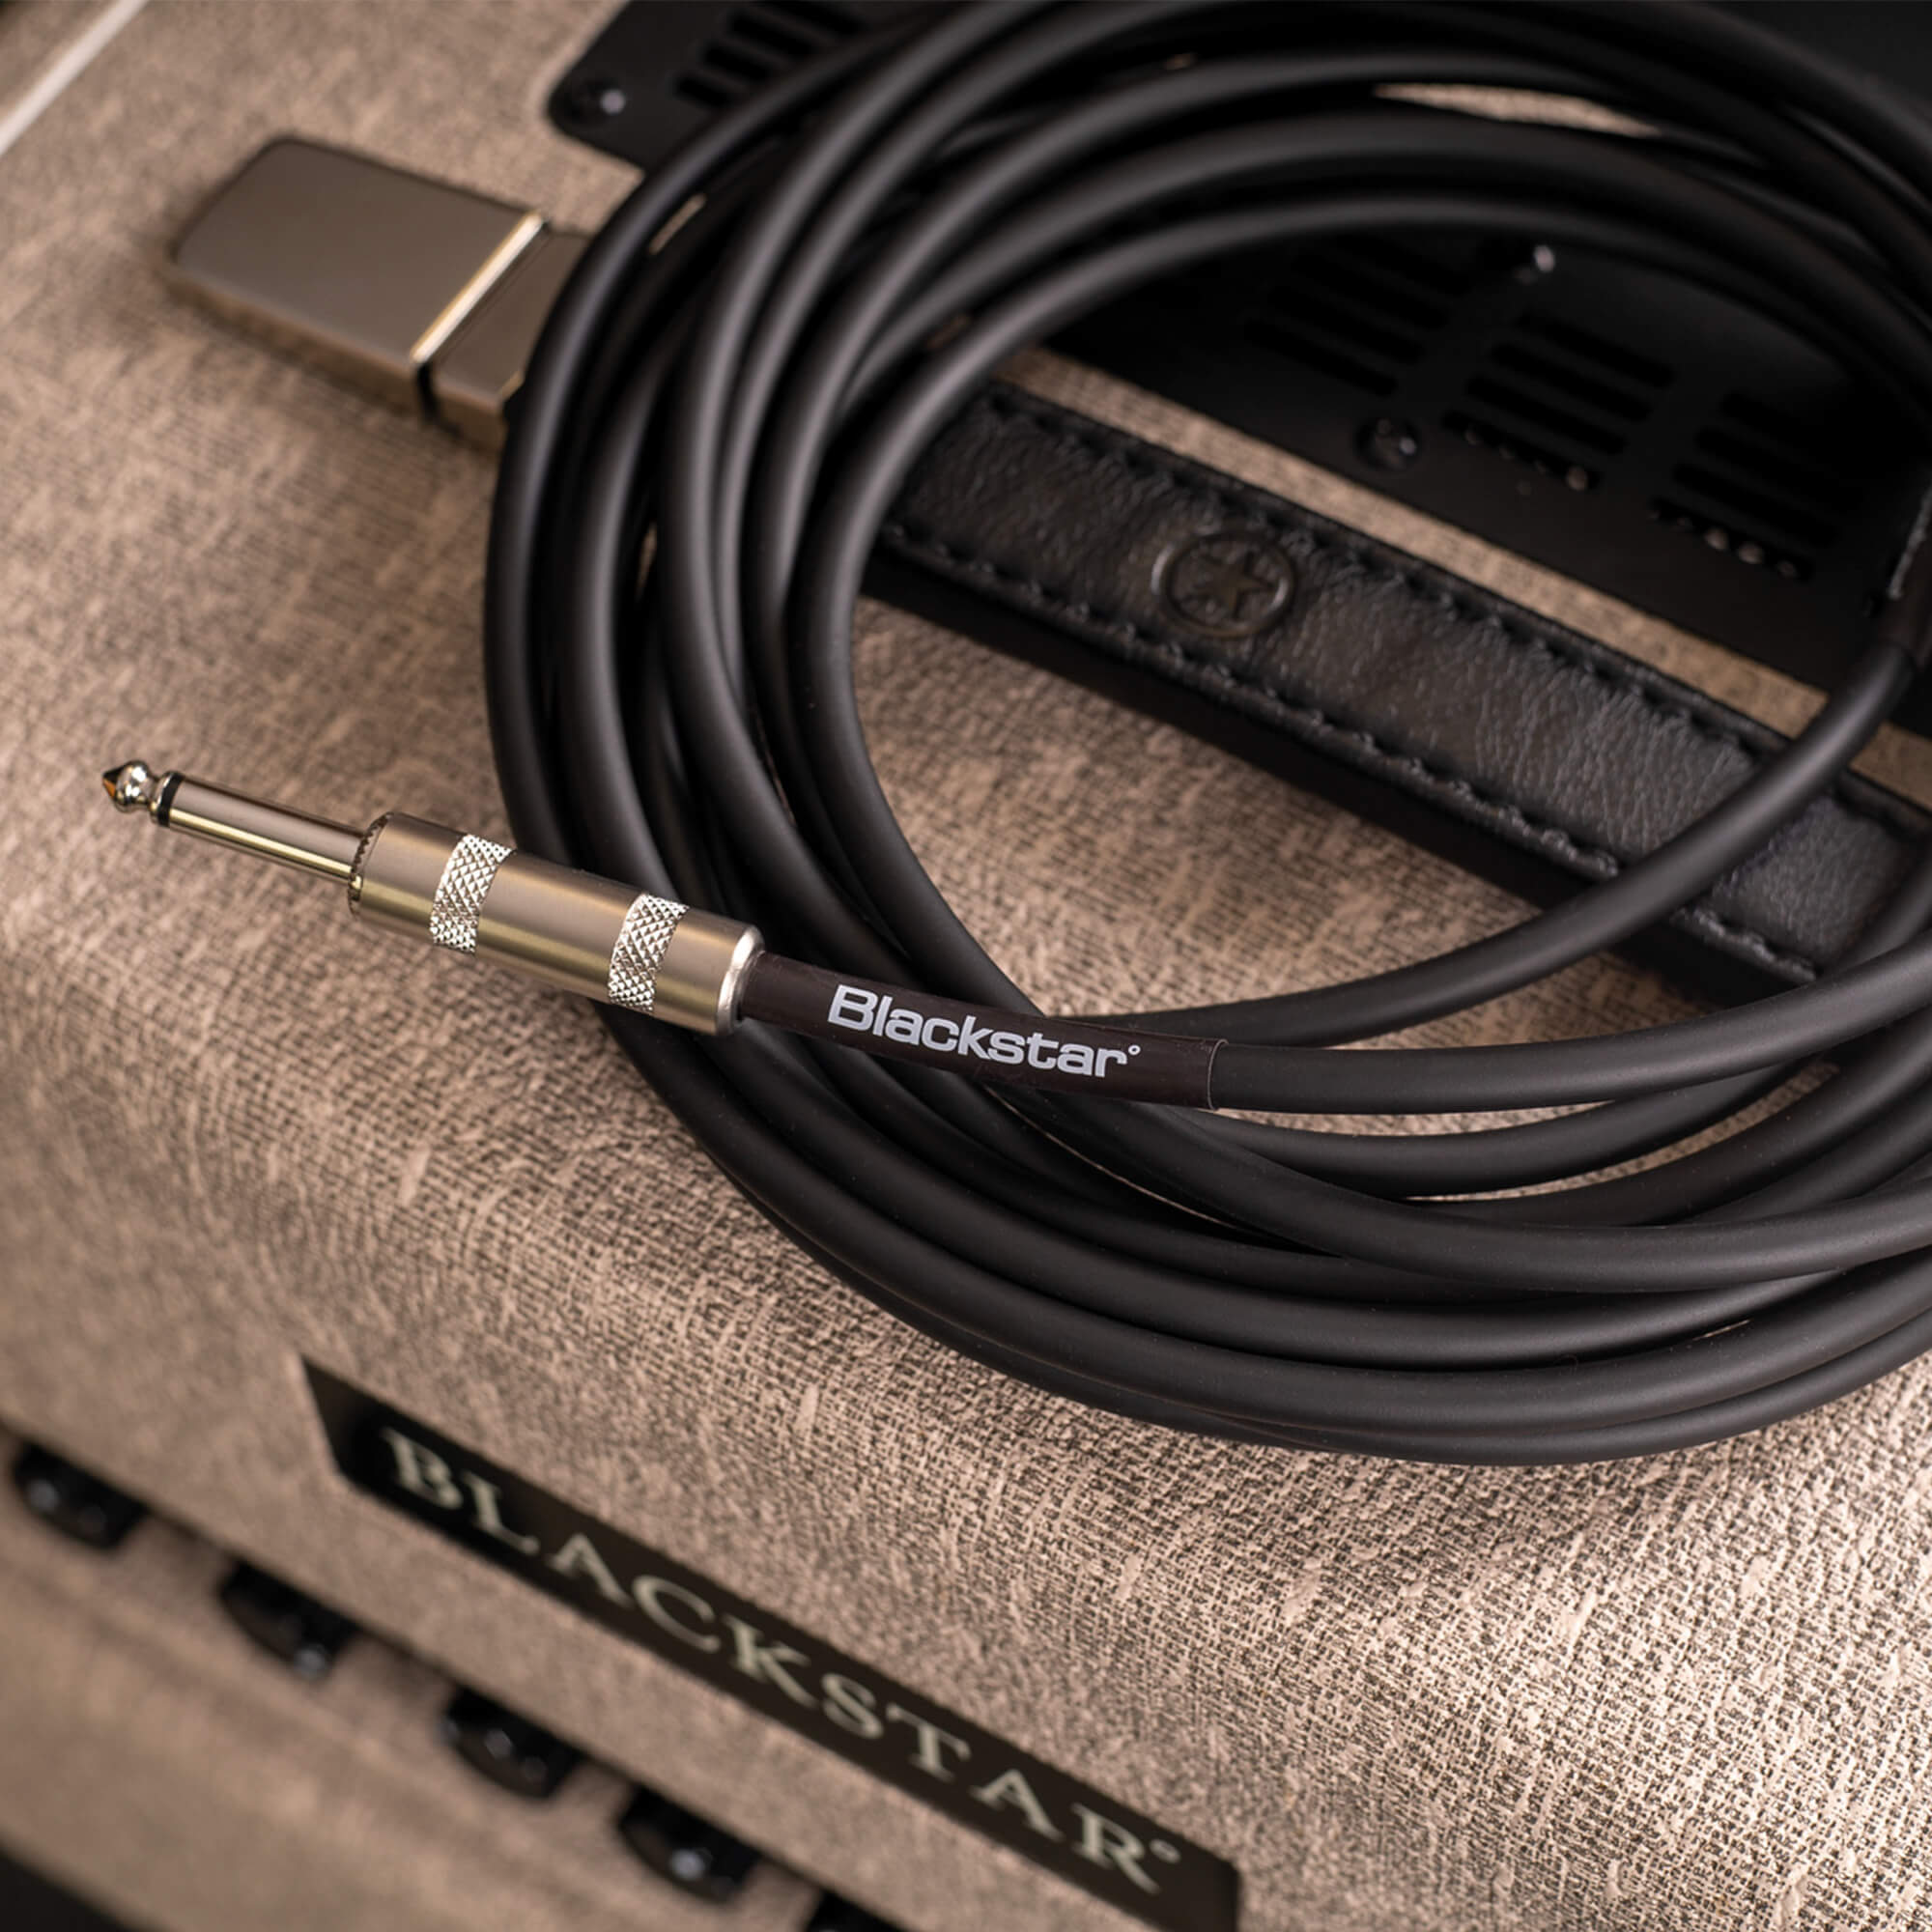 Blackstar Amps instrument cable on top of amplifier